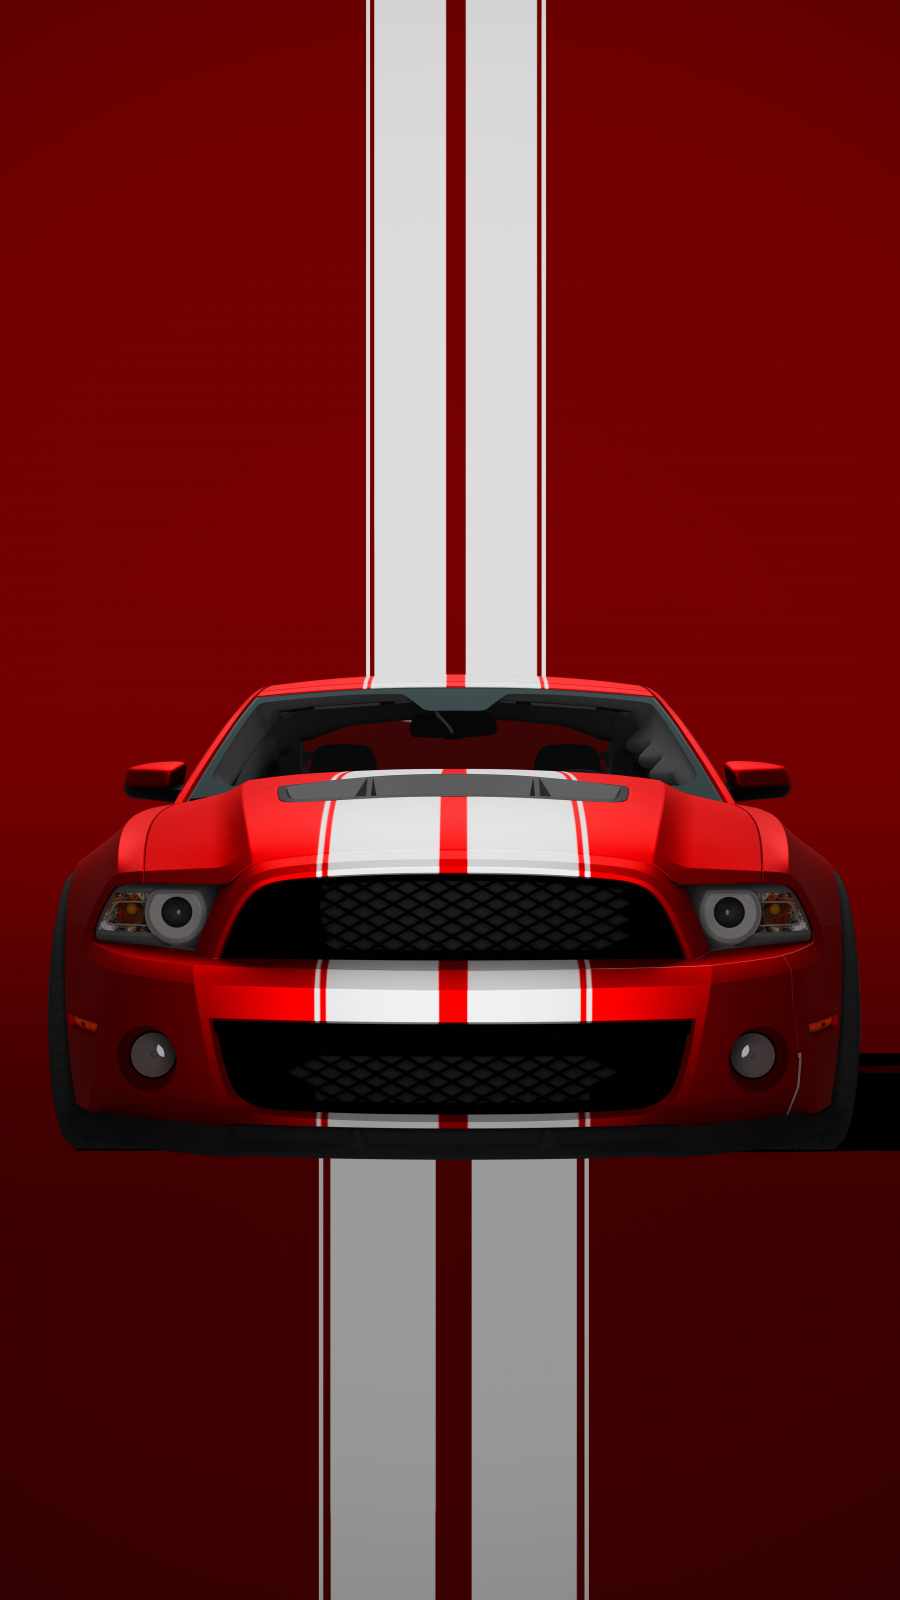 Red Shelby Mustang IPhone Wallpaper - IPhone Wallpapers : iPhone Wallpapers